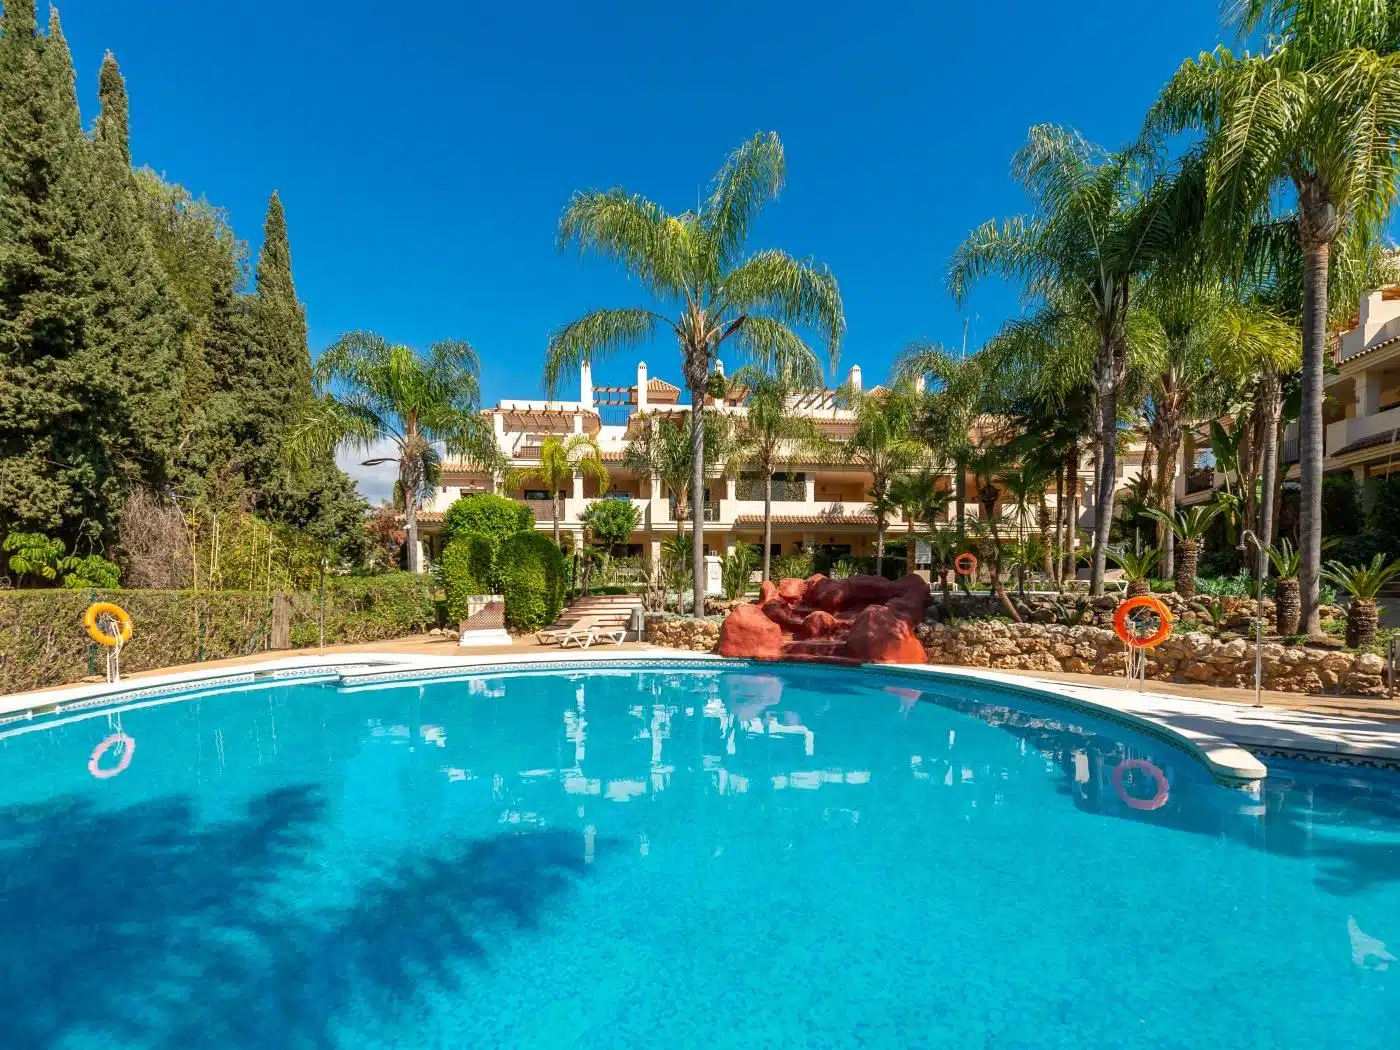 Welcome to the perfect holiday destination in the heart of Marbella